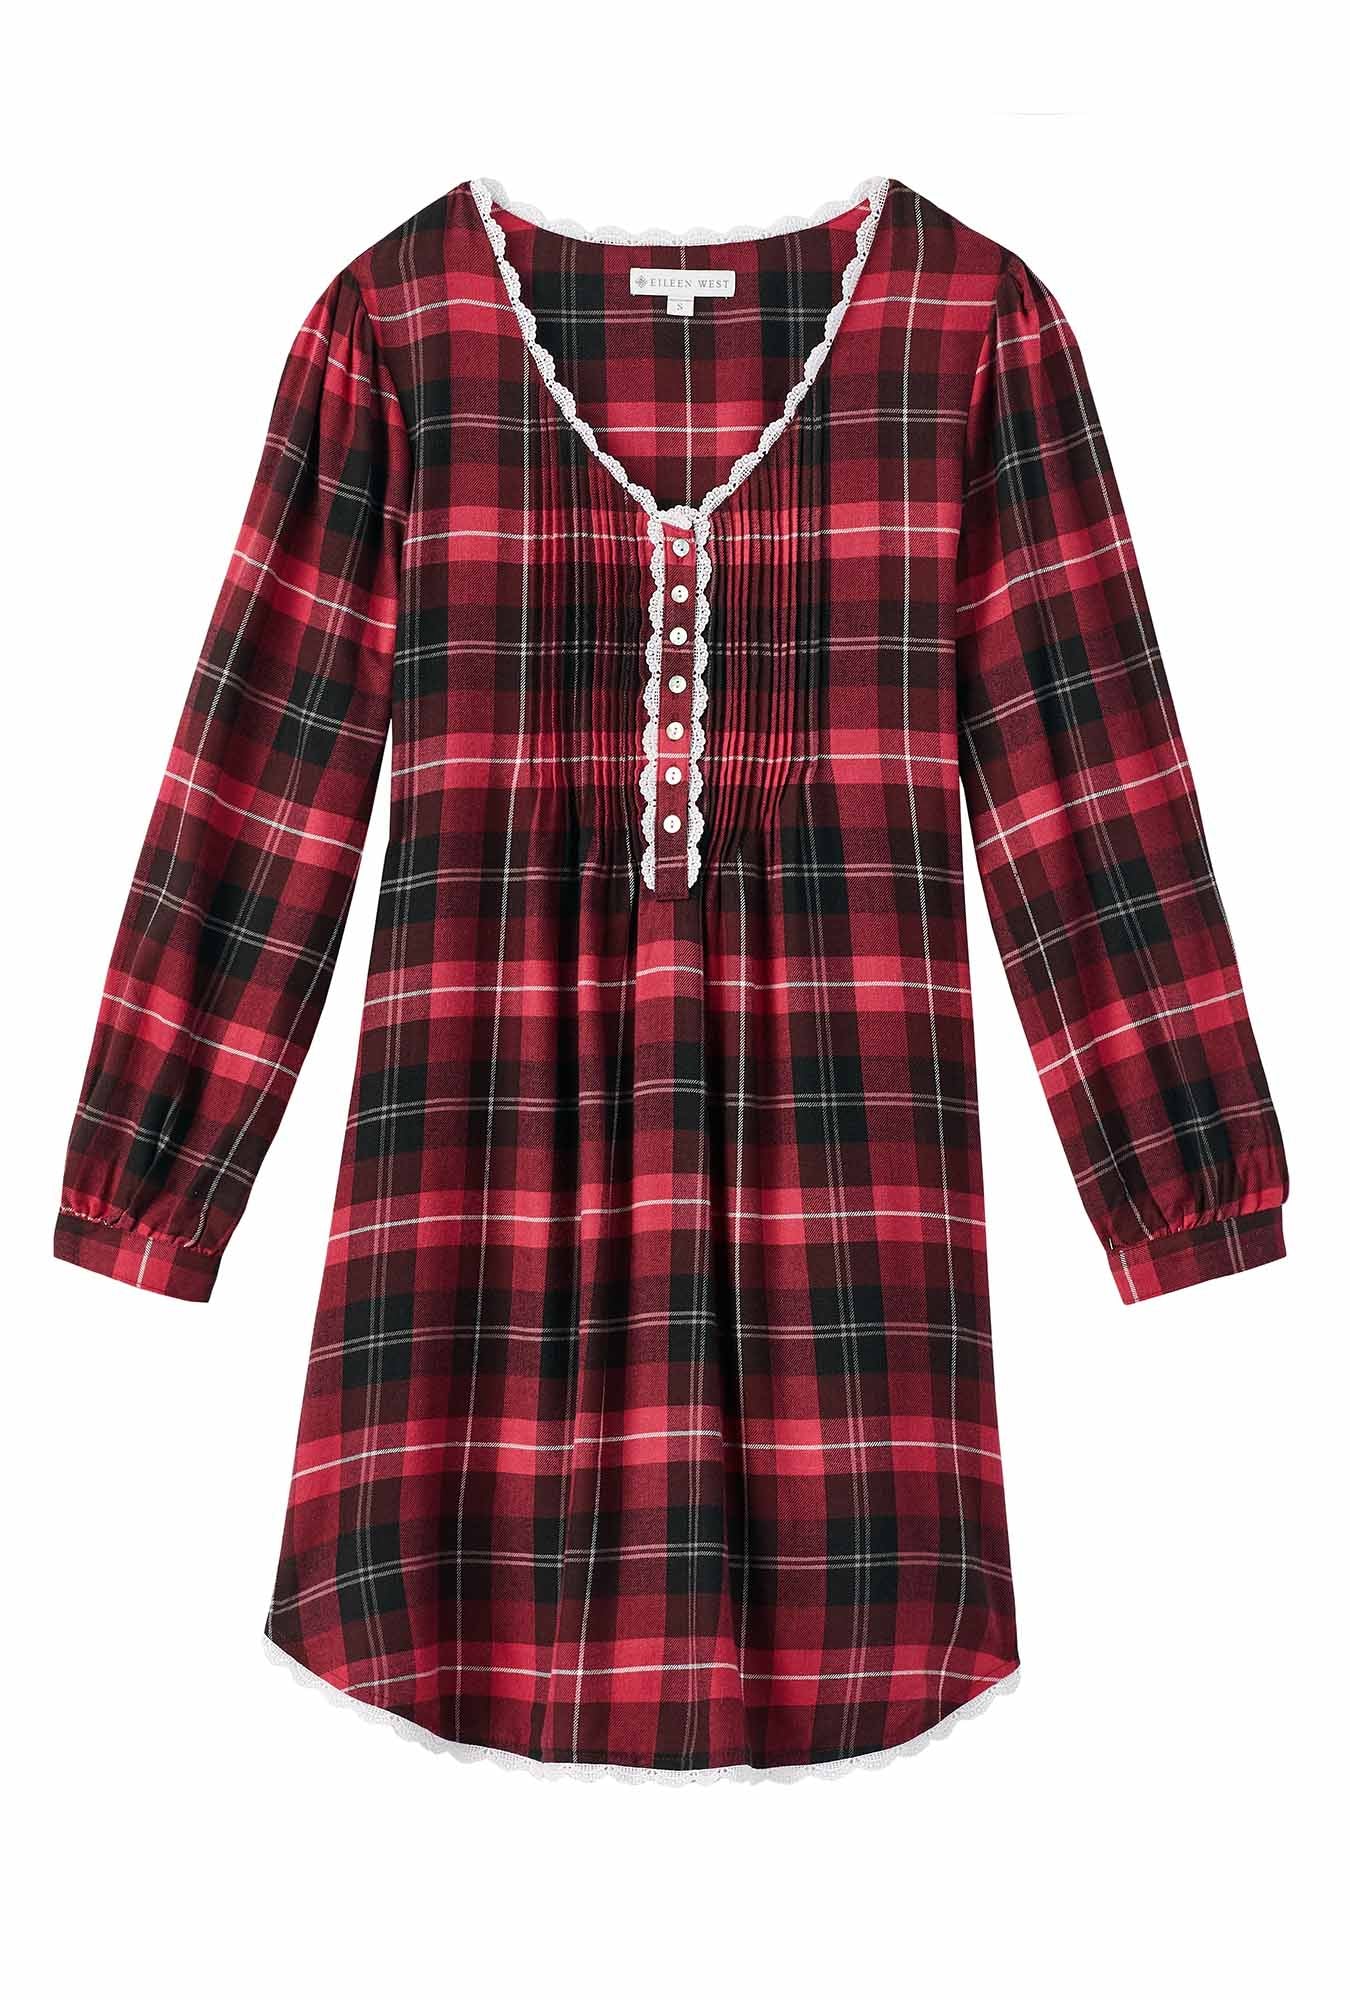 A lady wearing a holly berry plaid rayon long sleeve lightweight flannel nightshirt.